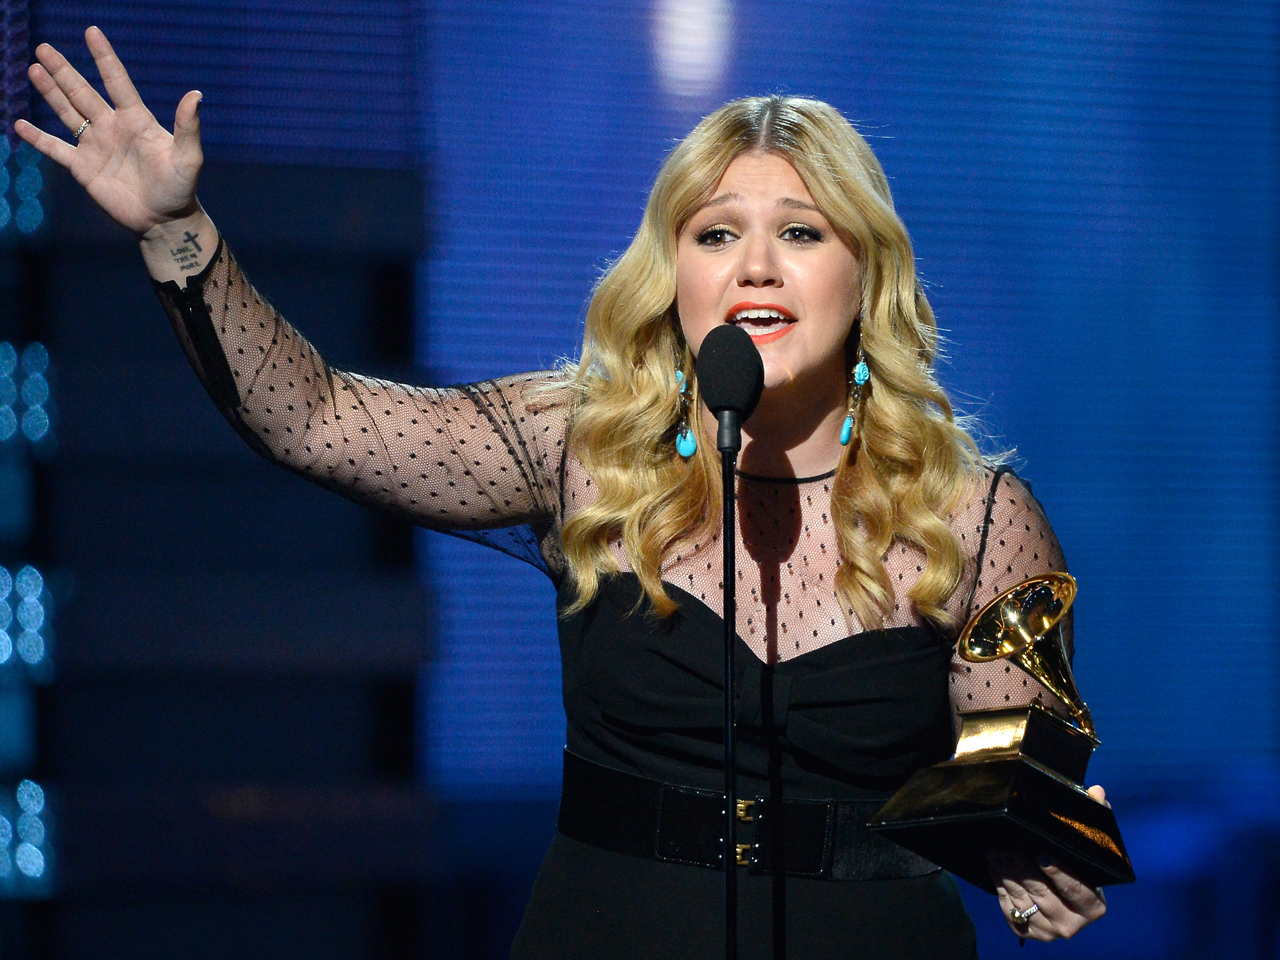 Grammys 13 Who S Miguel Kelly Clarkson Now Knows Cbs News